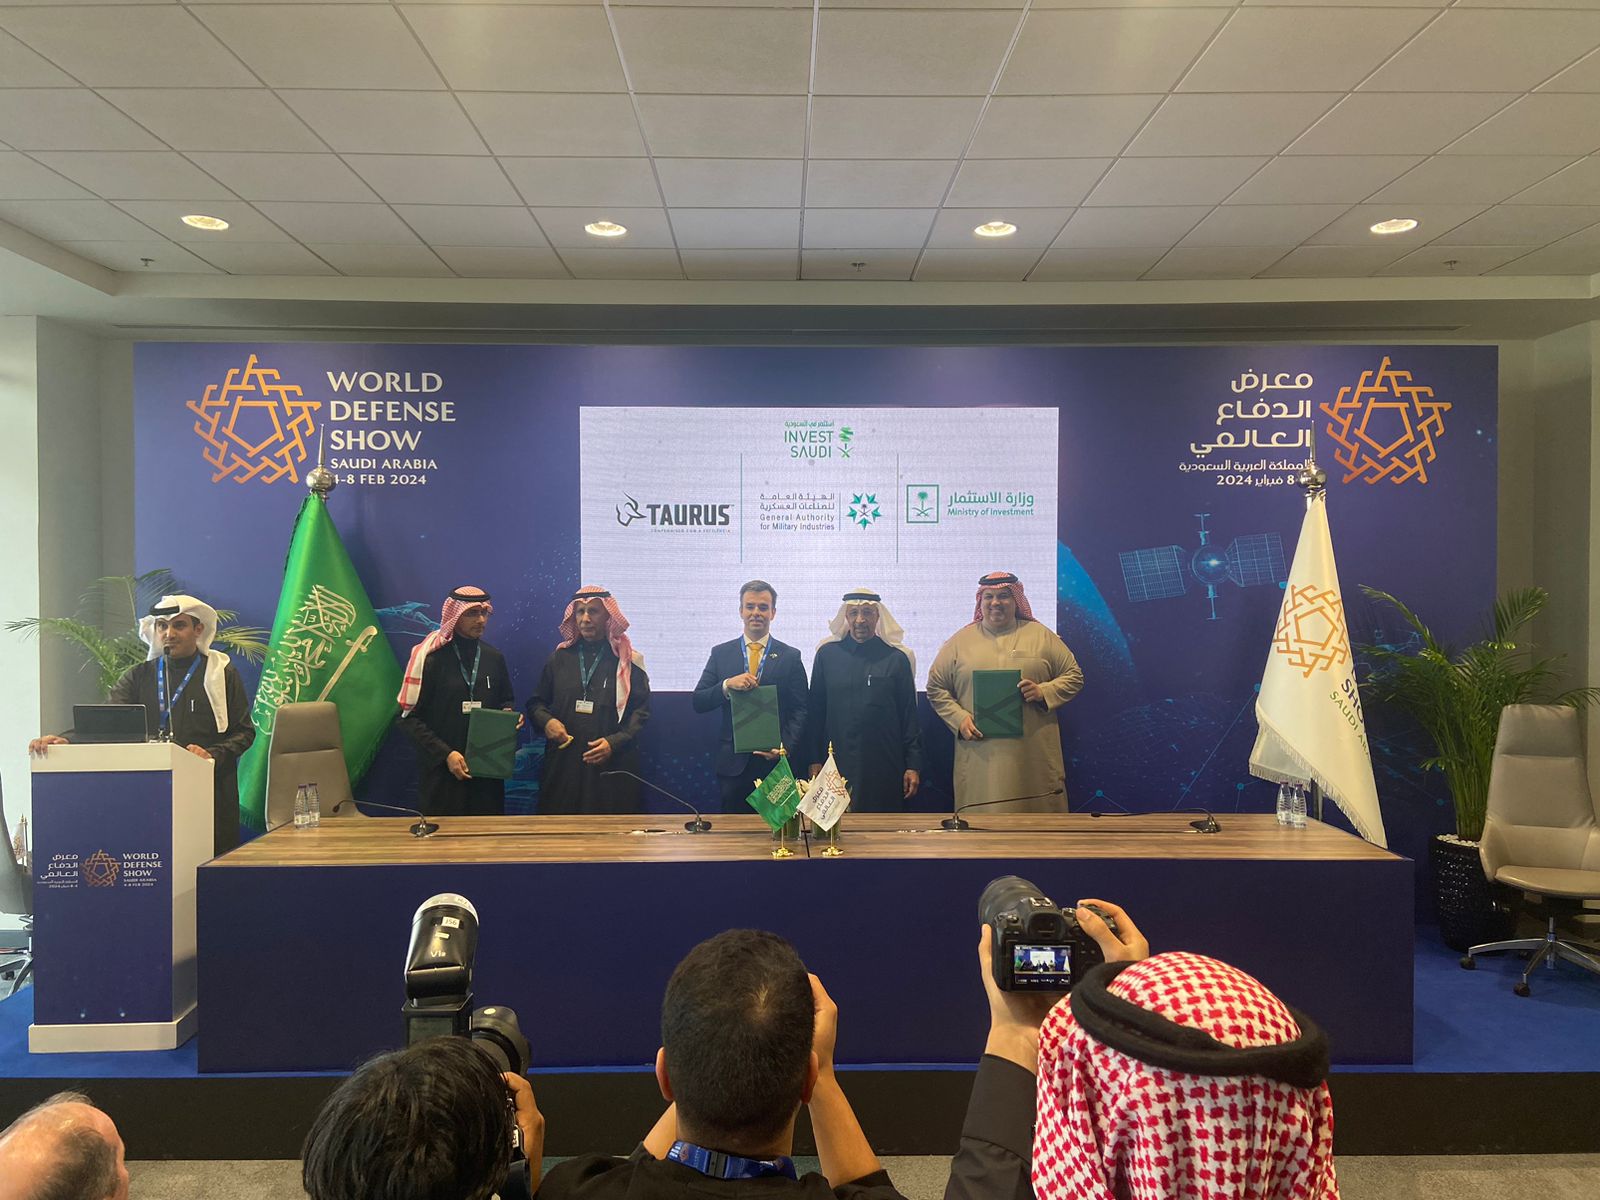 Taurus signs Memorandum of Understanding with the Saudi Ministry of Investment and GAMI - General Authority for Military Industries